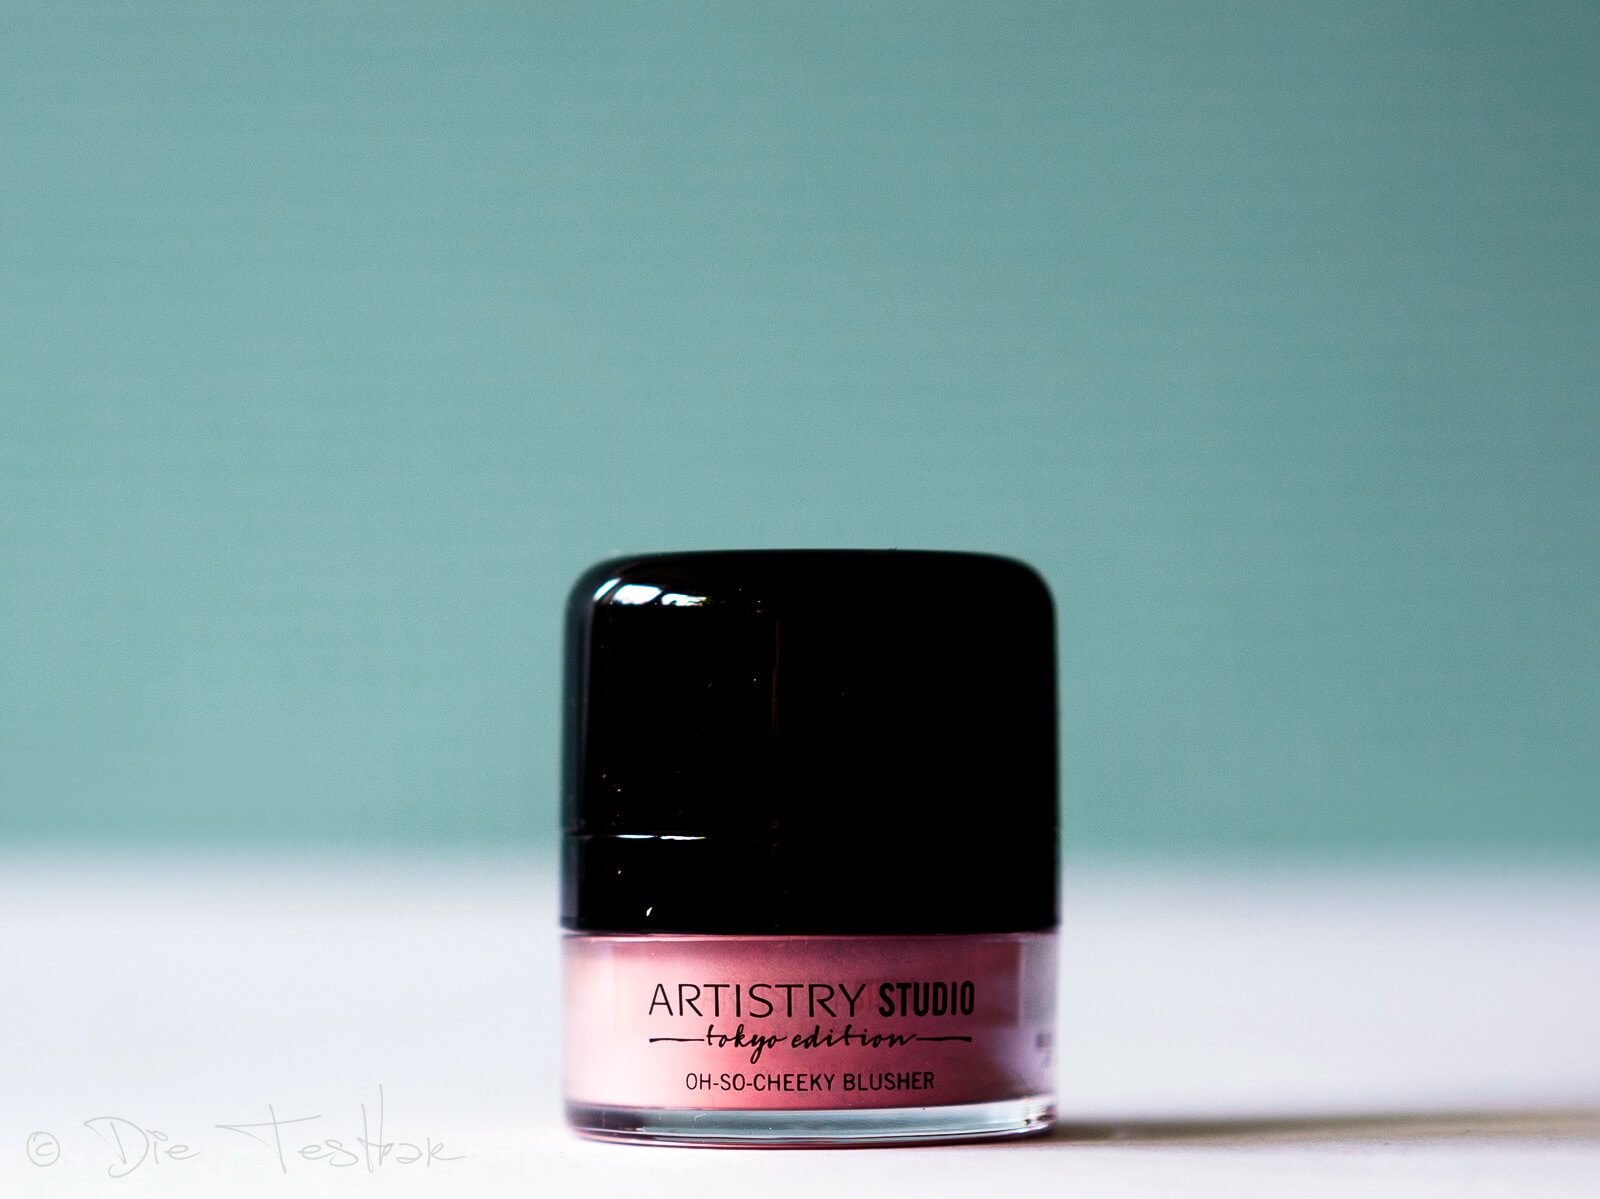 Oh-So-Cheeky Blusher ARTISTRY STUDIO™ Tokyo Edition